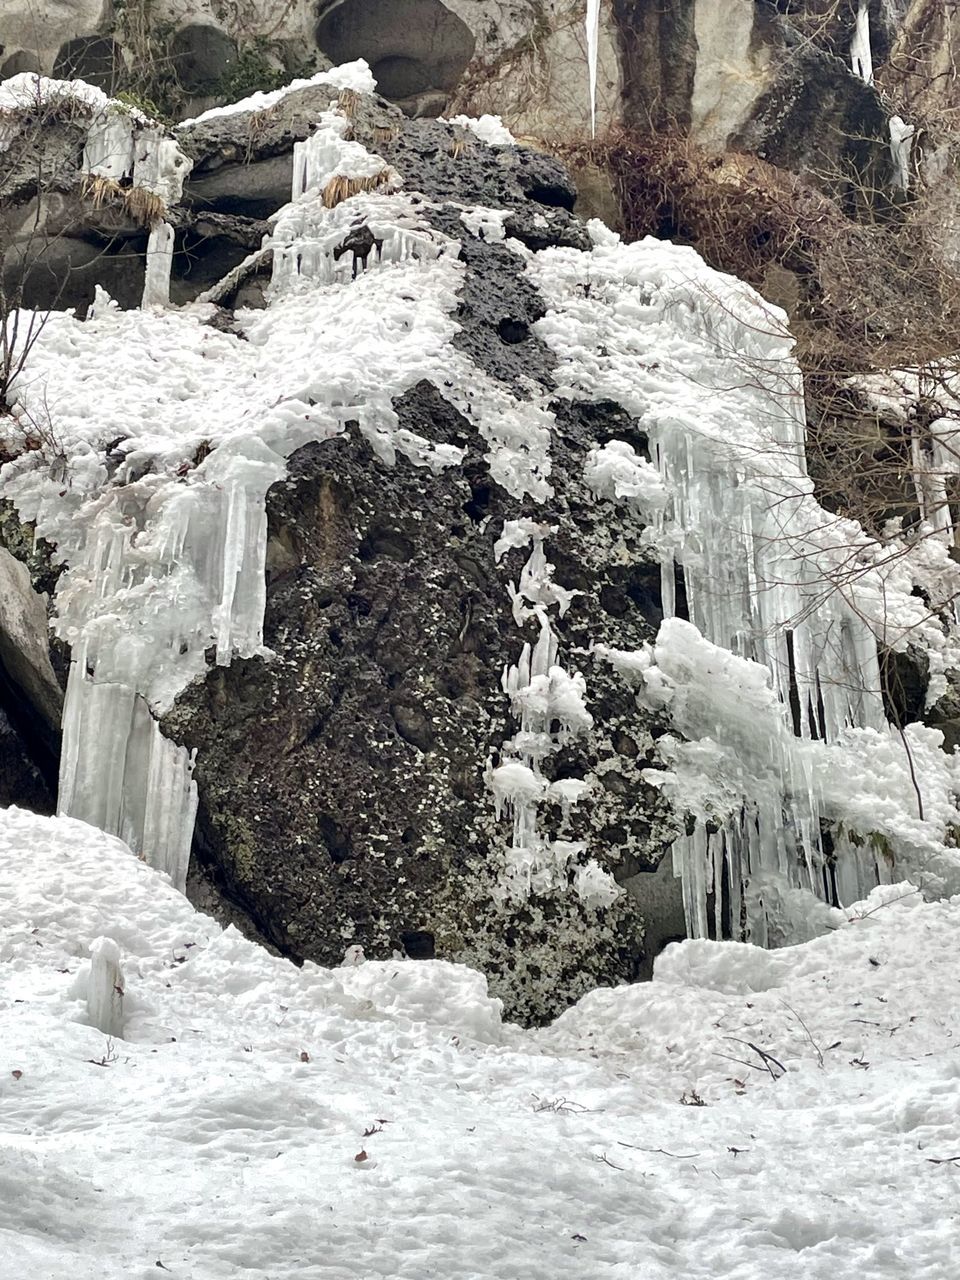 winter, snow, cold temperature, ice, nature, no people, frozen, day, rock, beauty in nature, white, outdoors, scenics - nature, environment, freezing, waterfall, tranquility, non-urban scene, land, rock formation, geology, mountain